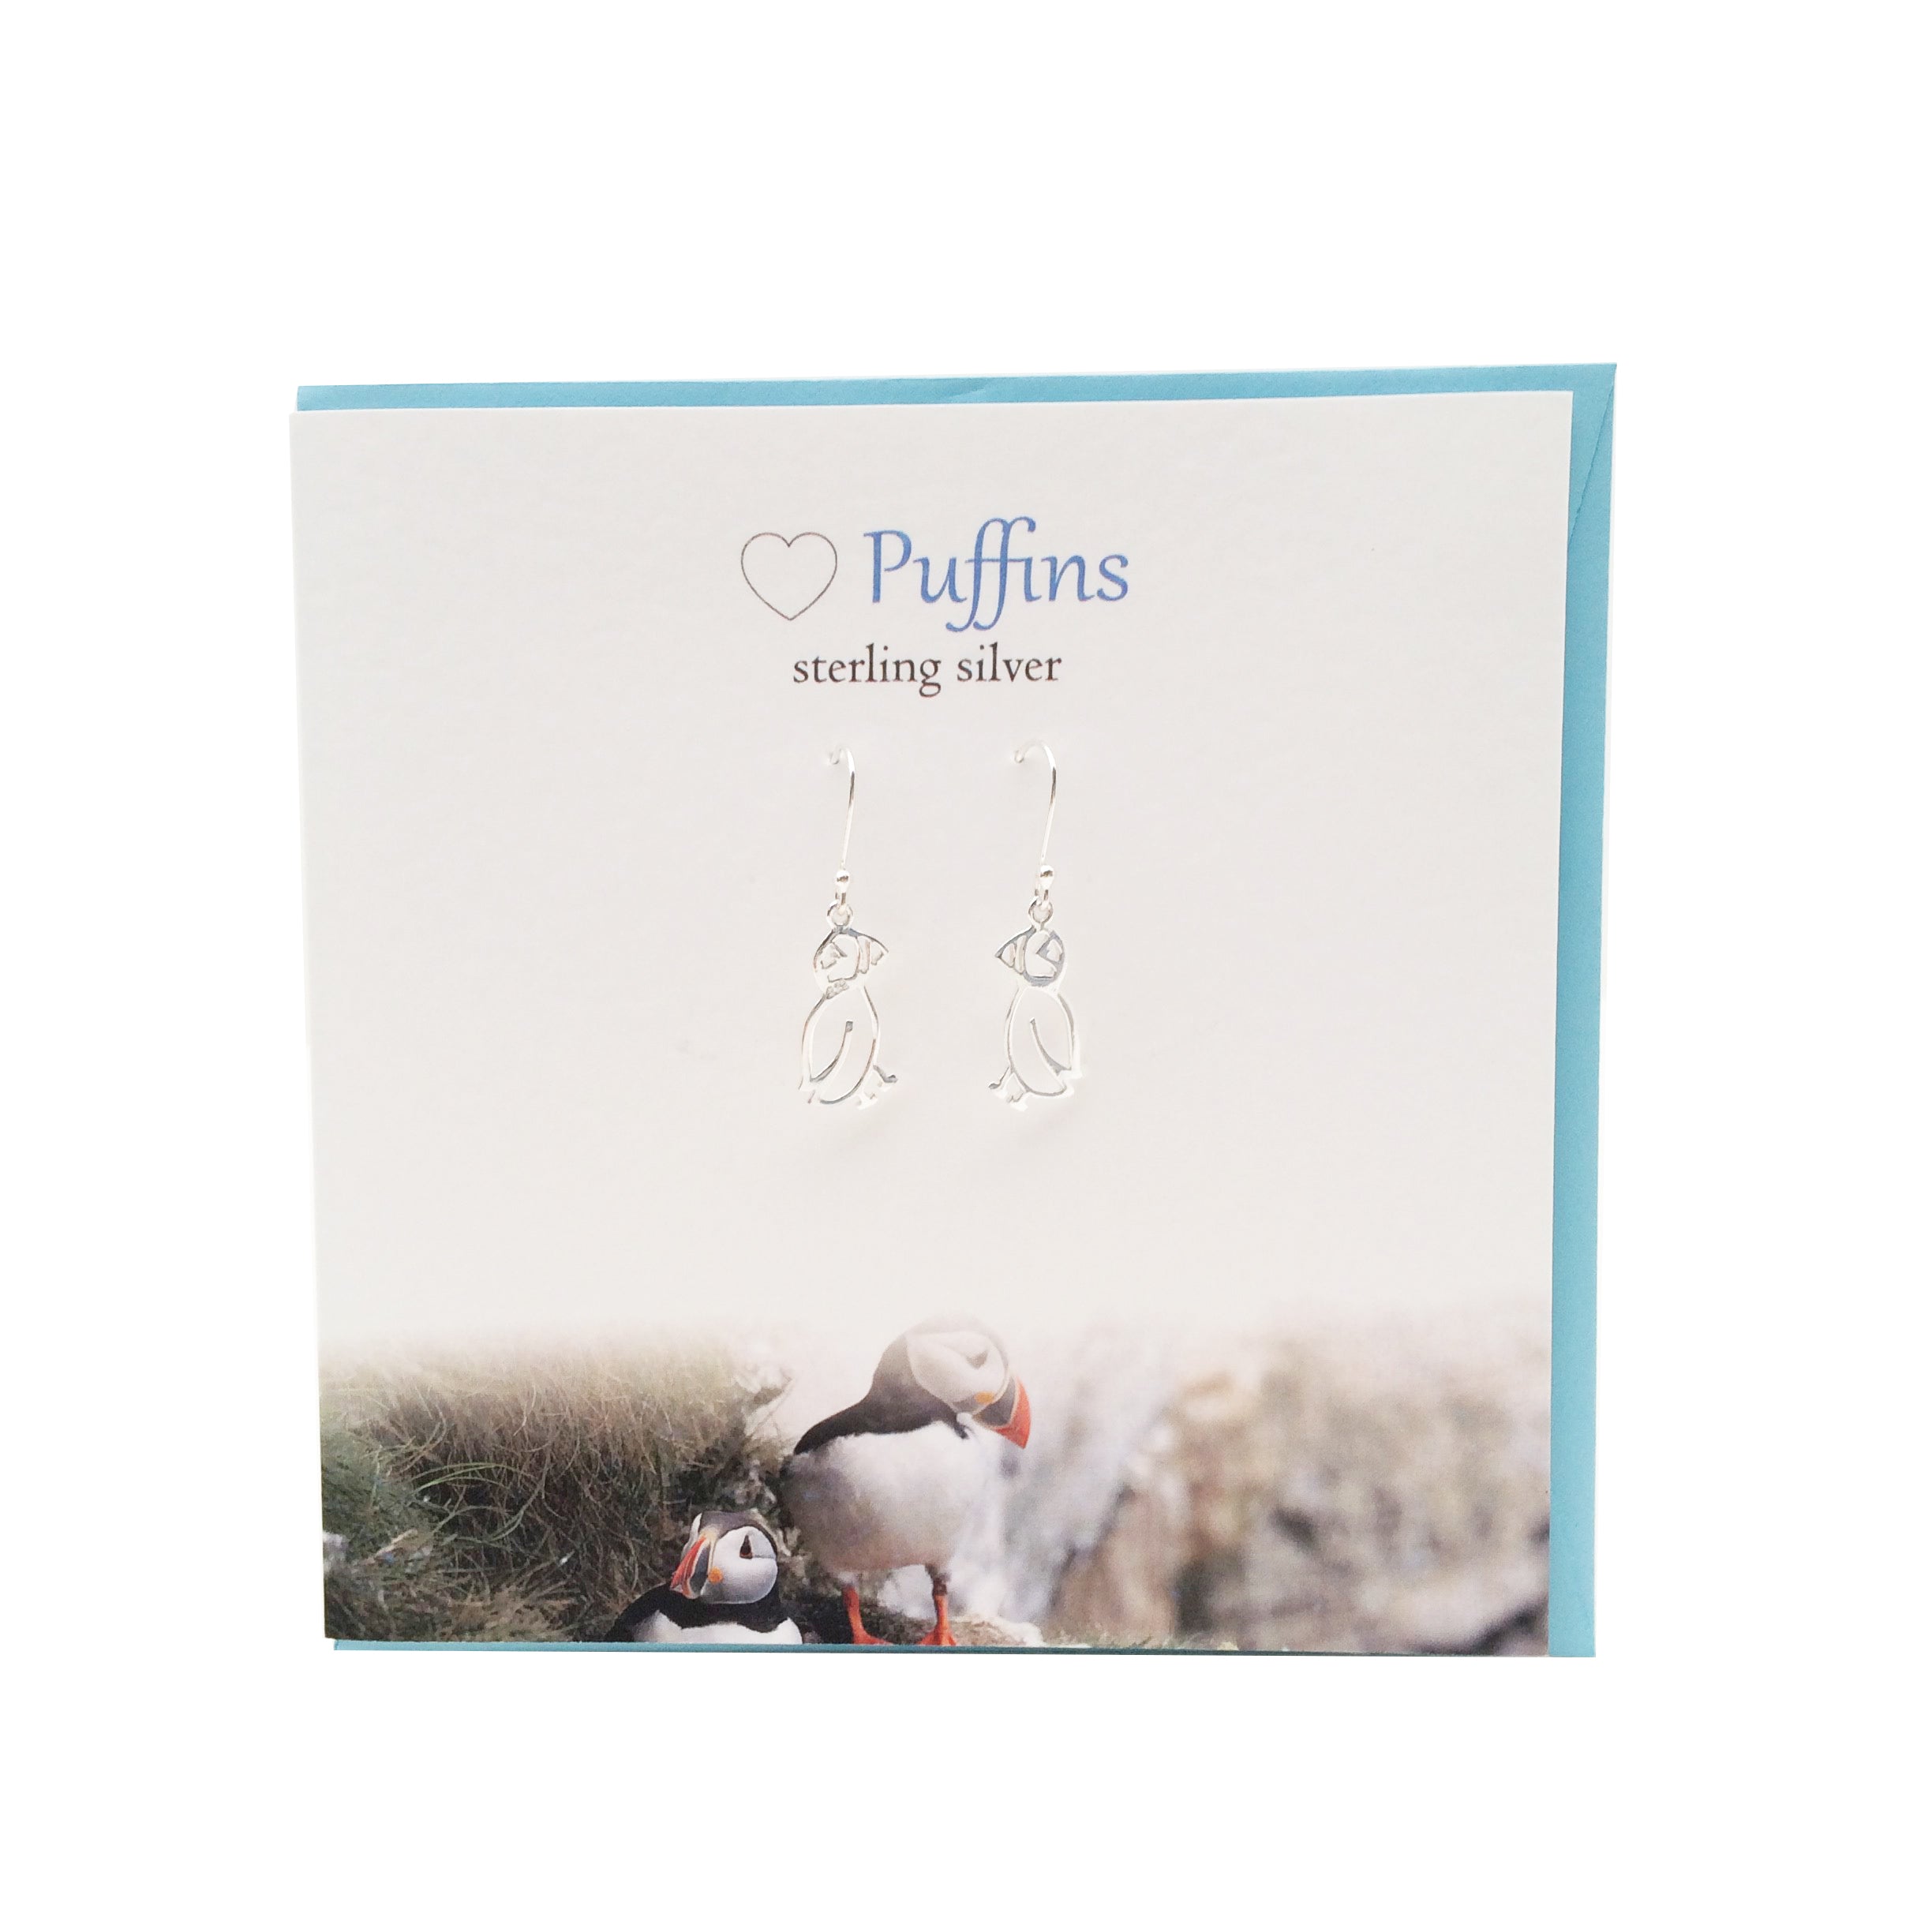 Puffin sterling silver earrings | The Silver Studio Scotland